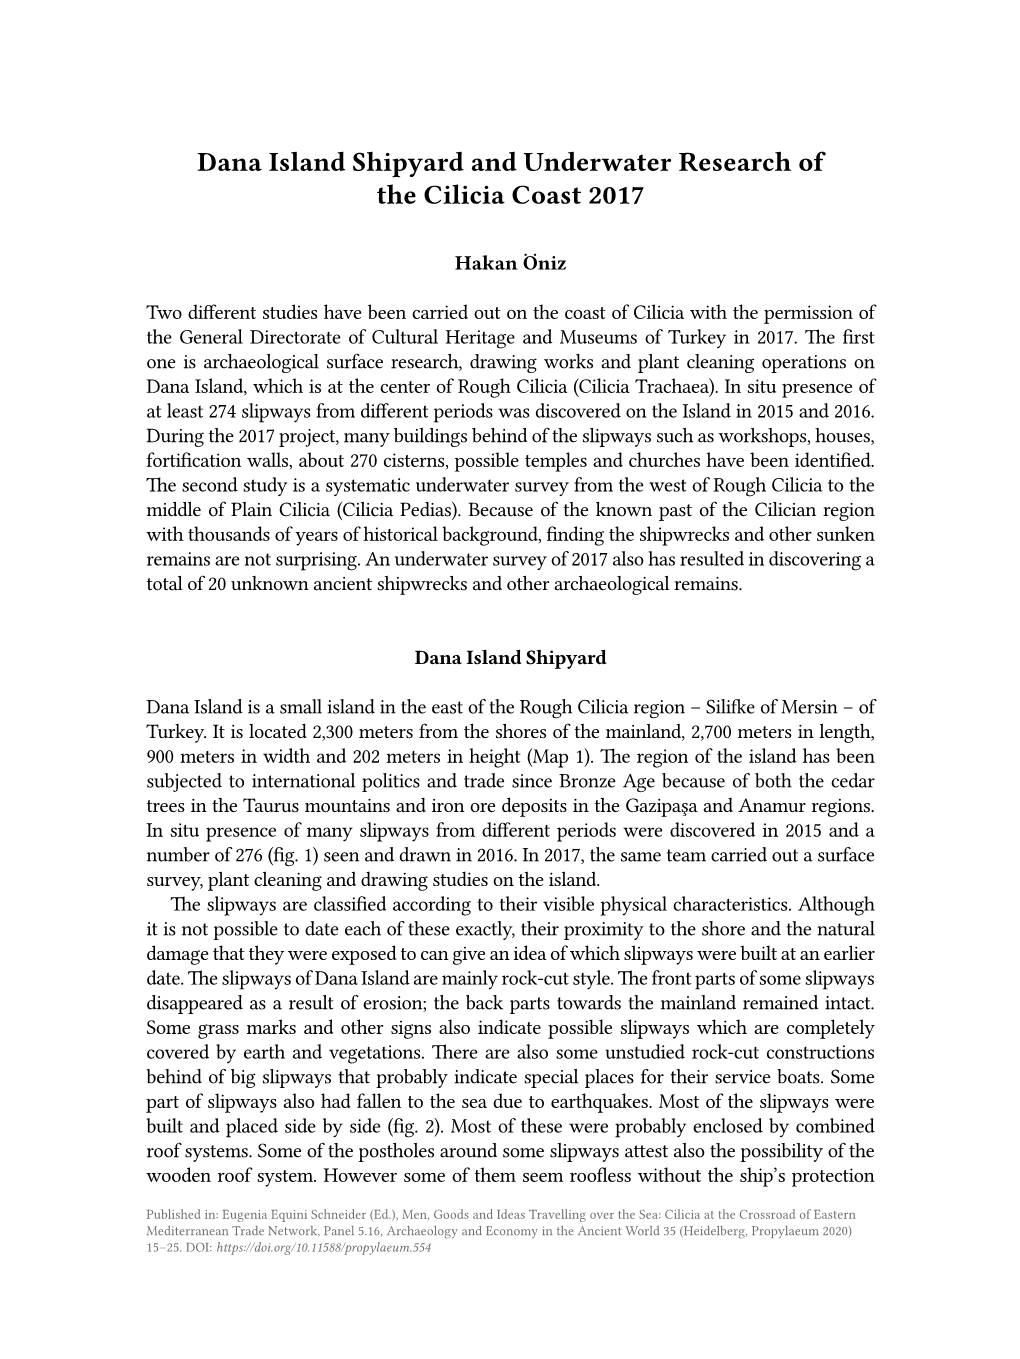 Cilicia at the Crossroad of Eastern Mediterranean Trade Network, Panel 5.16, Archaeology and Economy in the Ancient World 35 (Heidelberg, Propylaeum 2020) 15–25